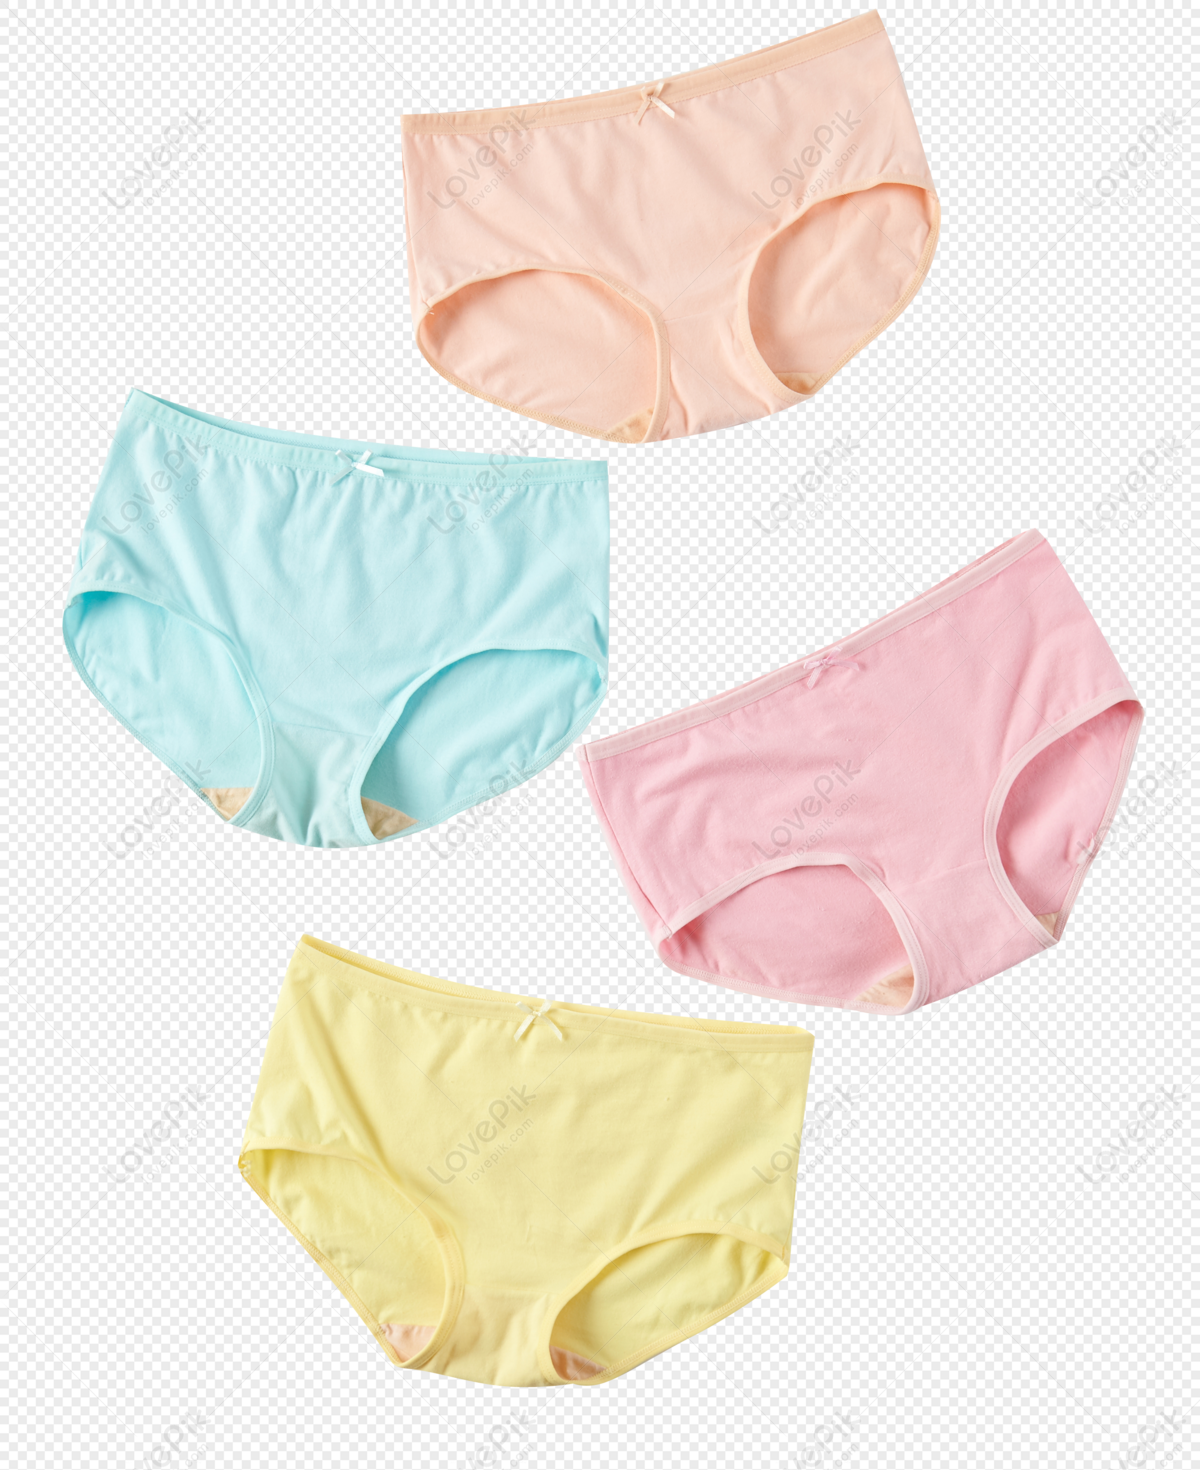 Lingerie Women Underwear PNG Images With Transparent Background